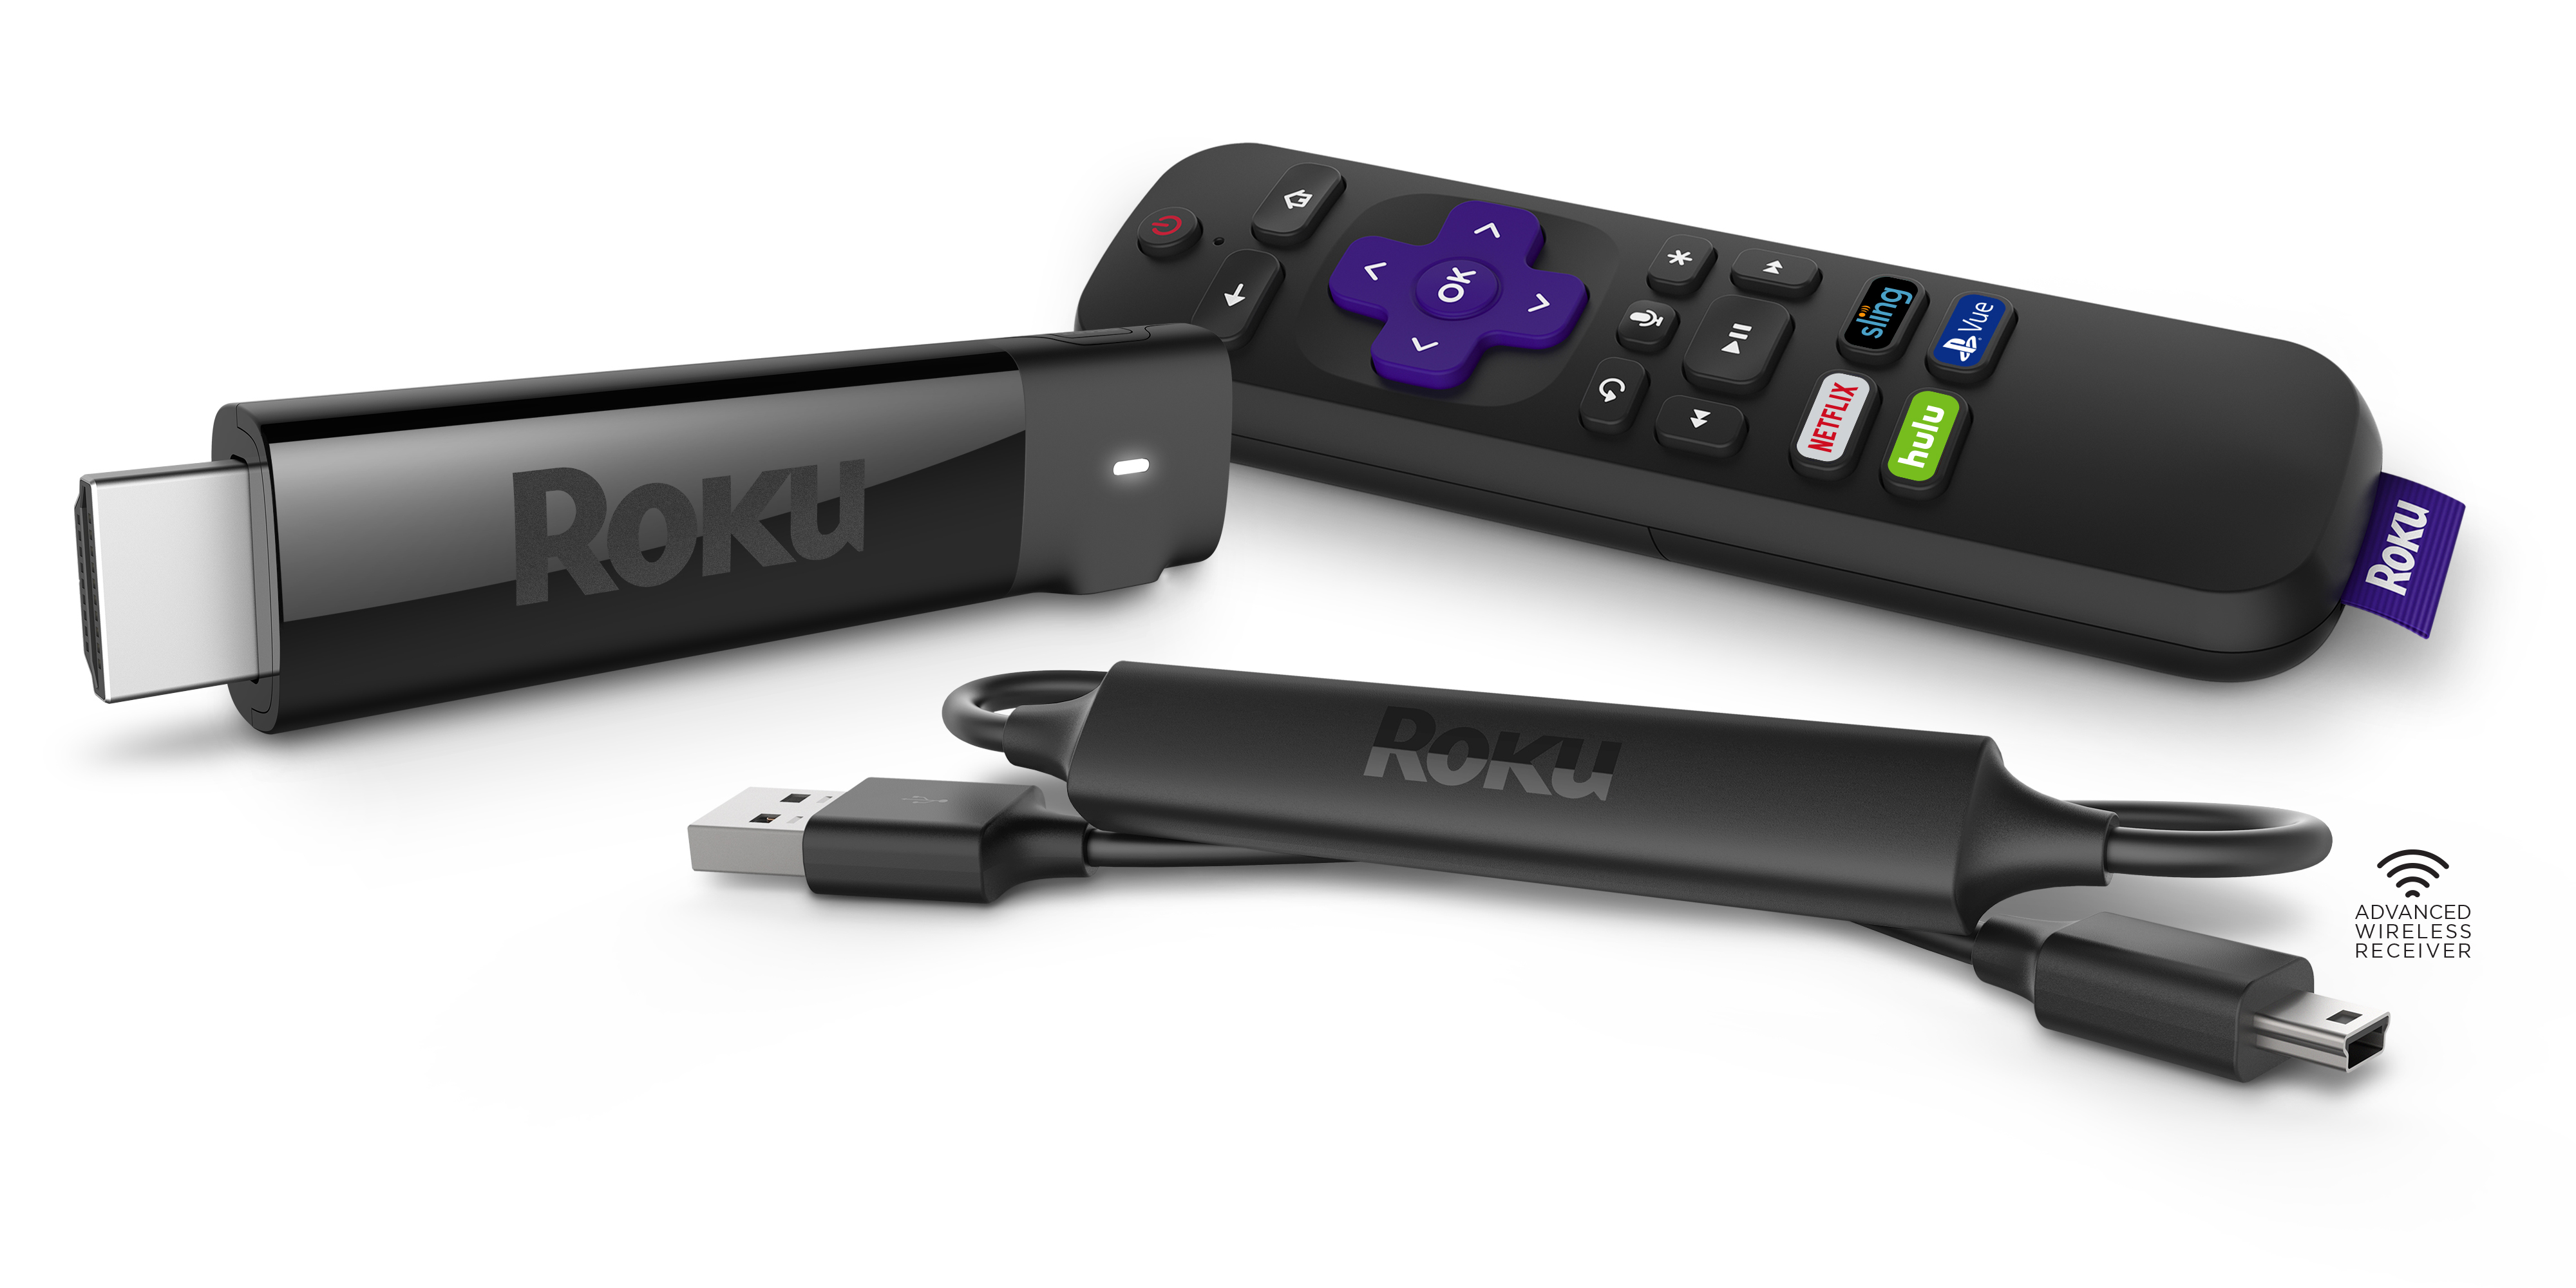 Roku releases new 4K Streaming Media Stick, drops price on Ultra set